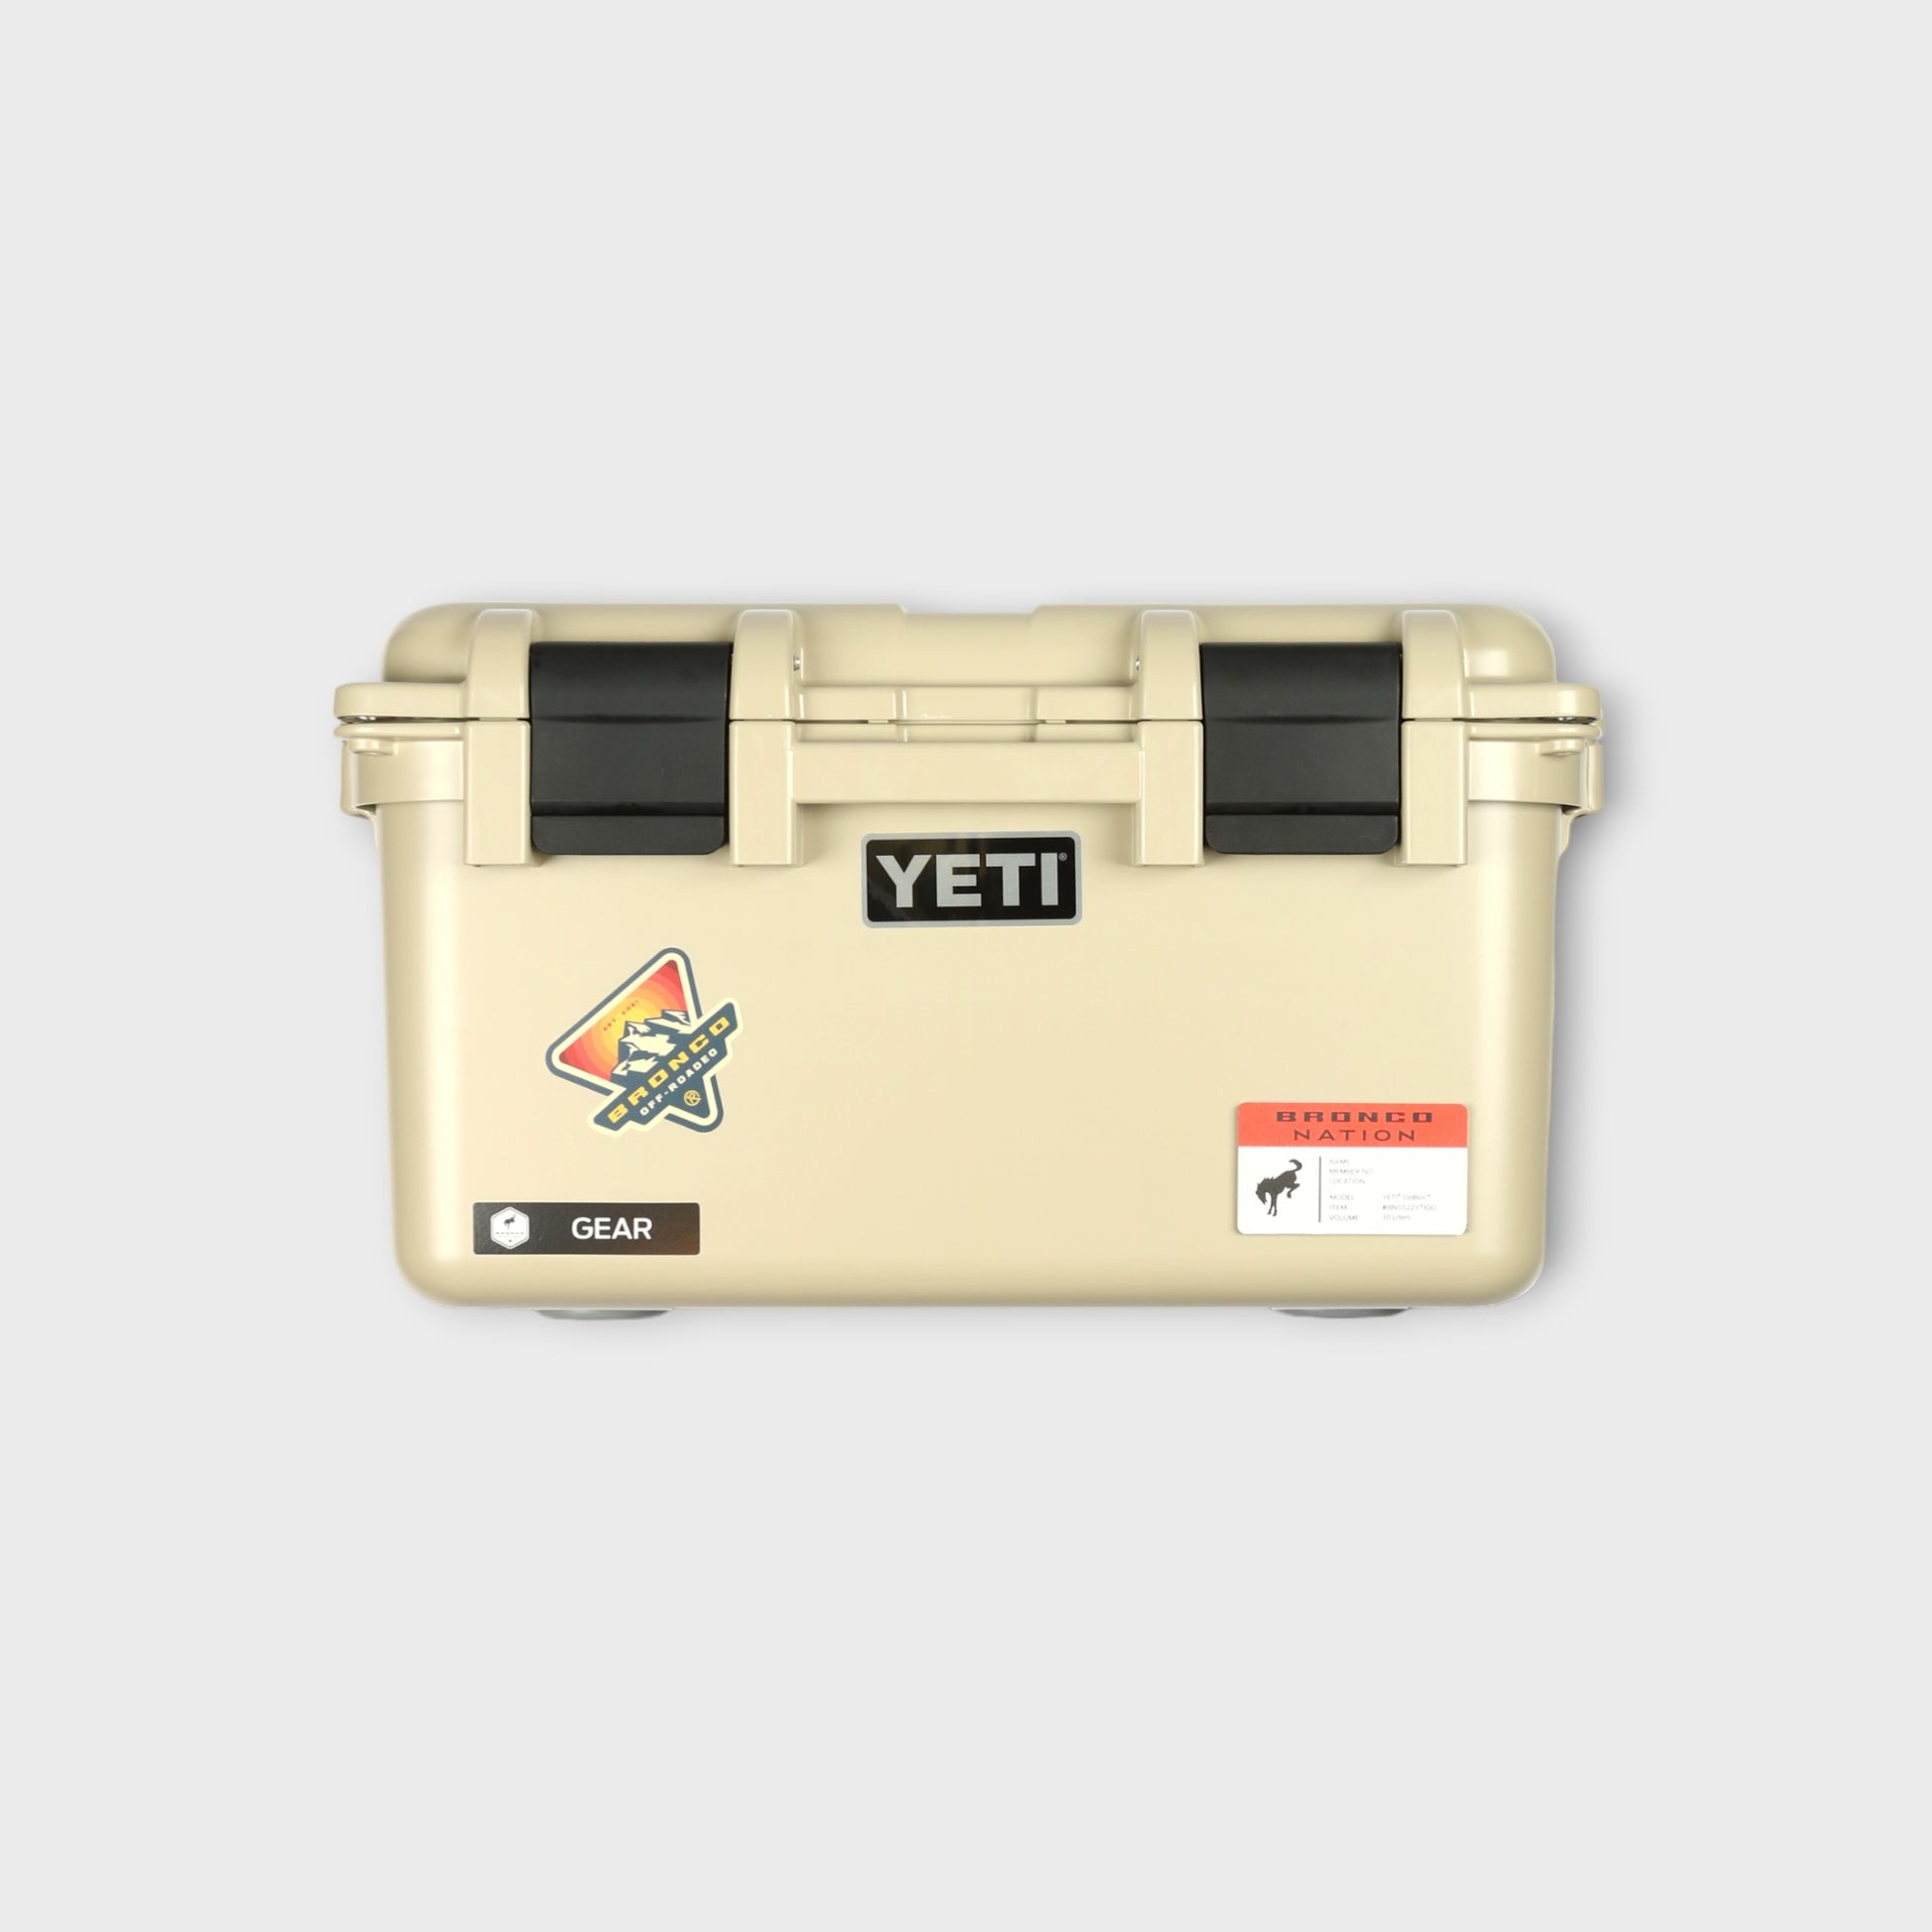 Gear Case Labels on front of Yeti